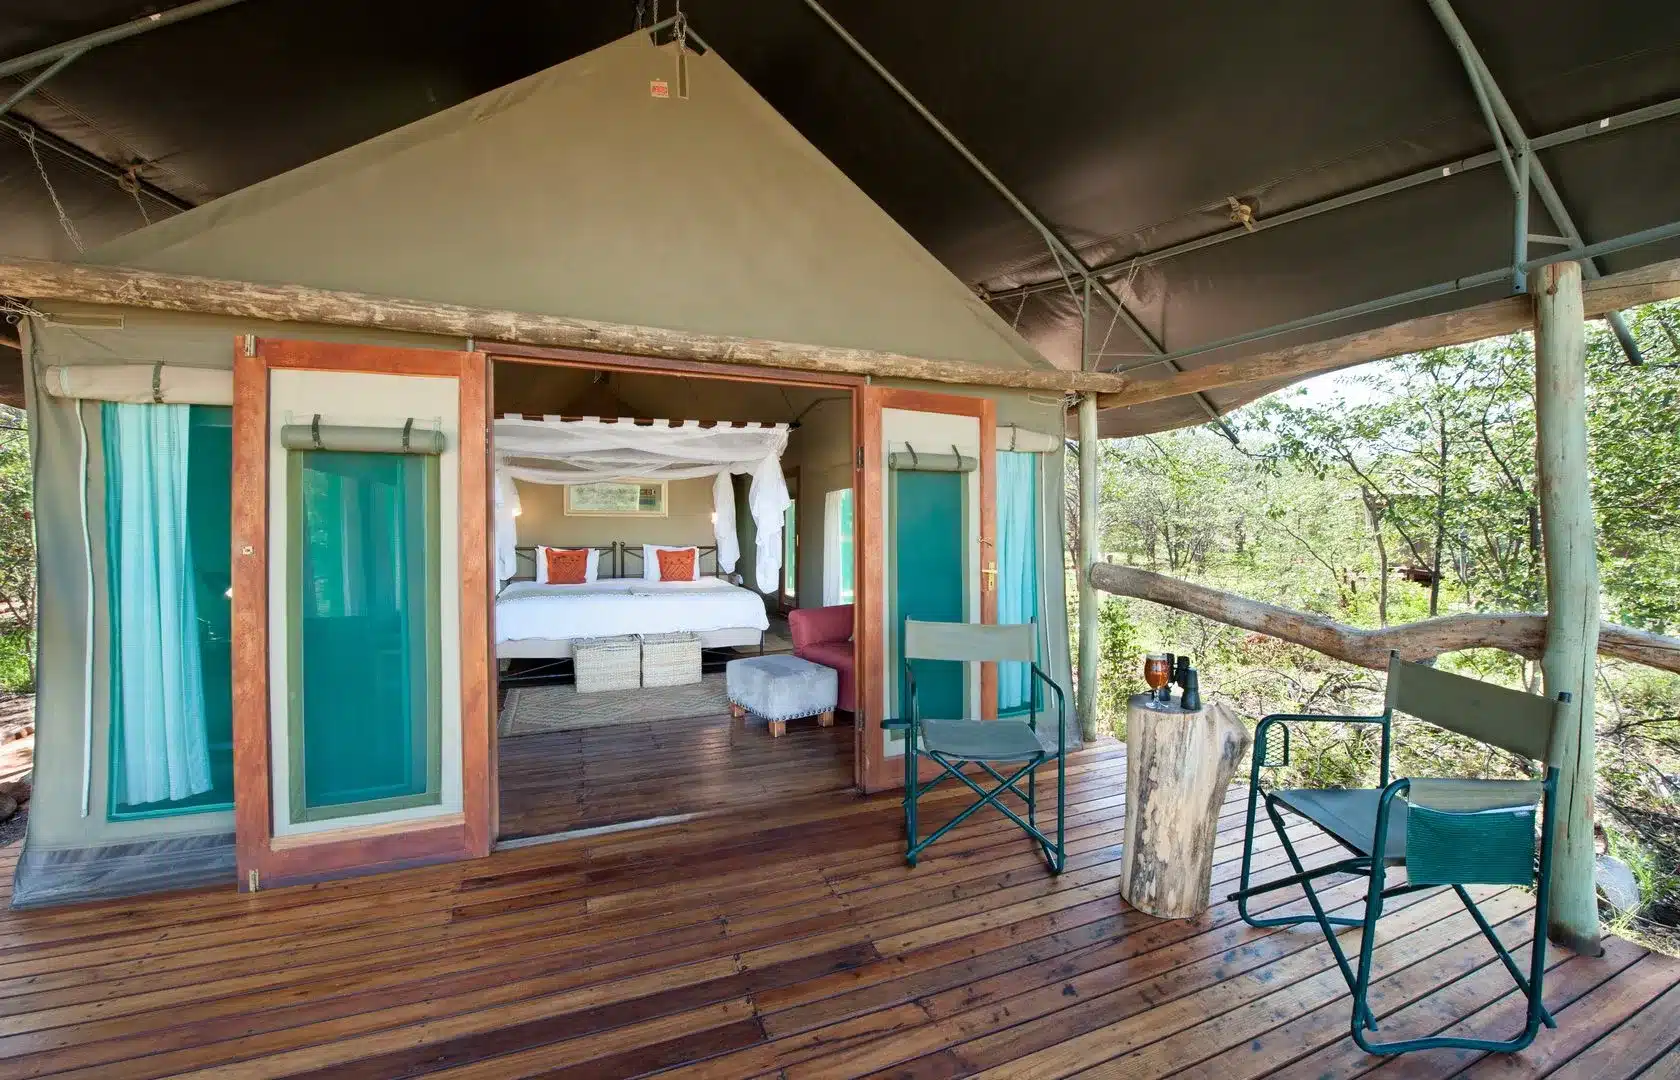 49 Ongava Tented Camp